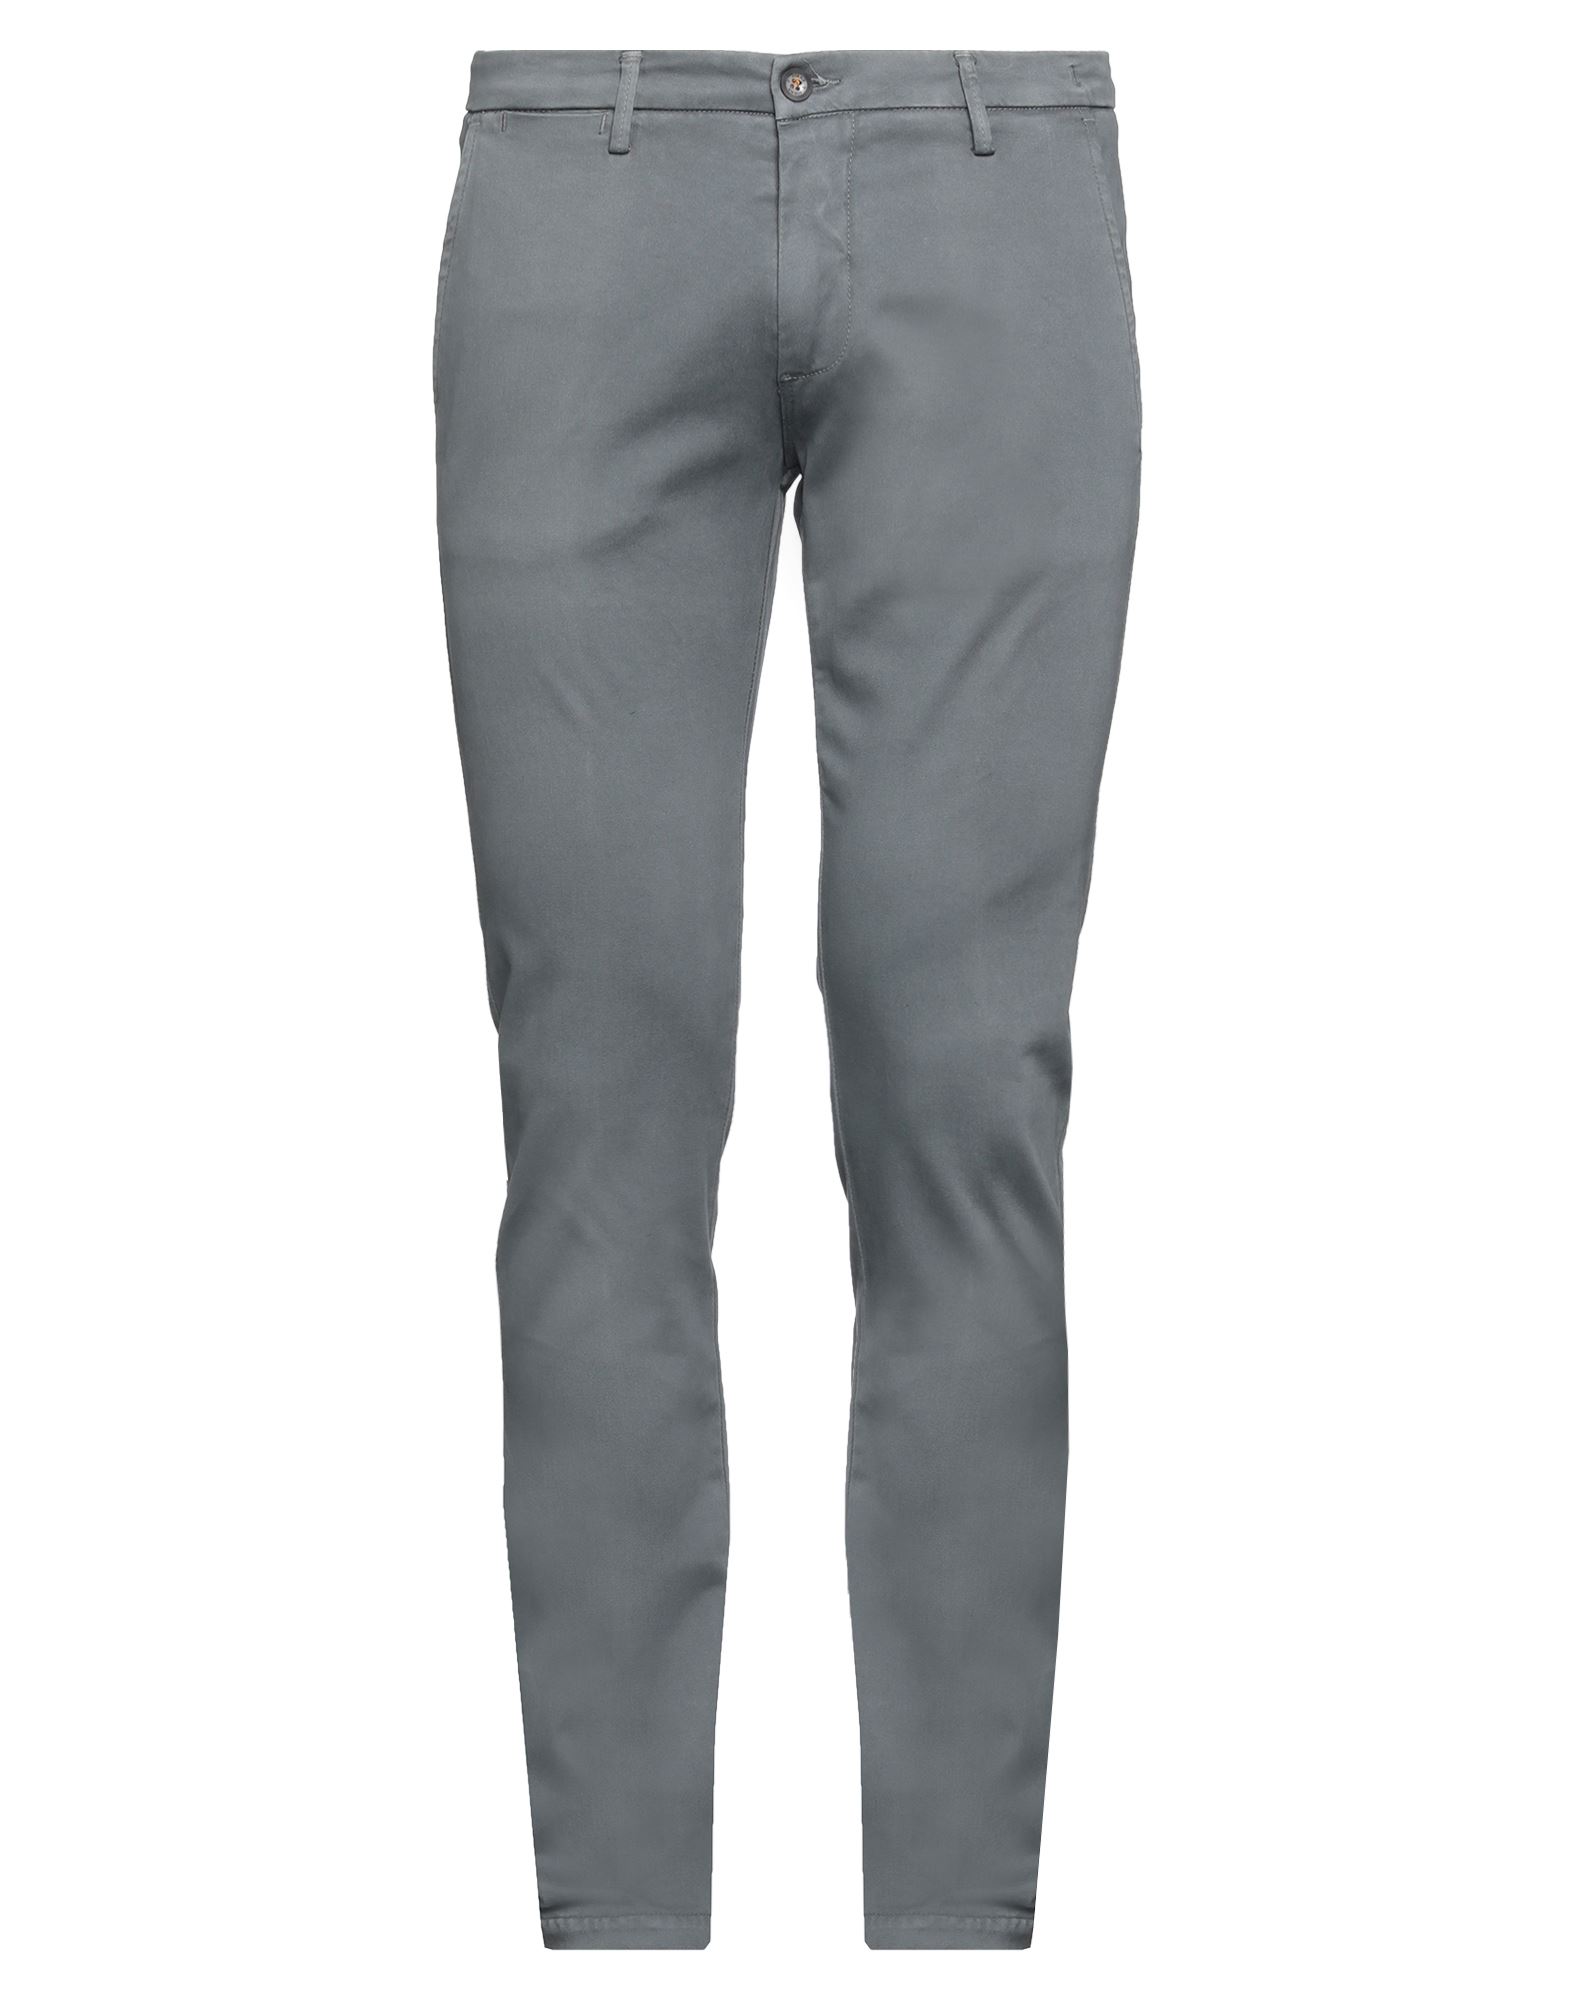 Our Fly Pants In Grey